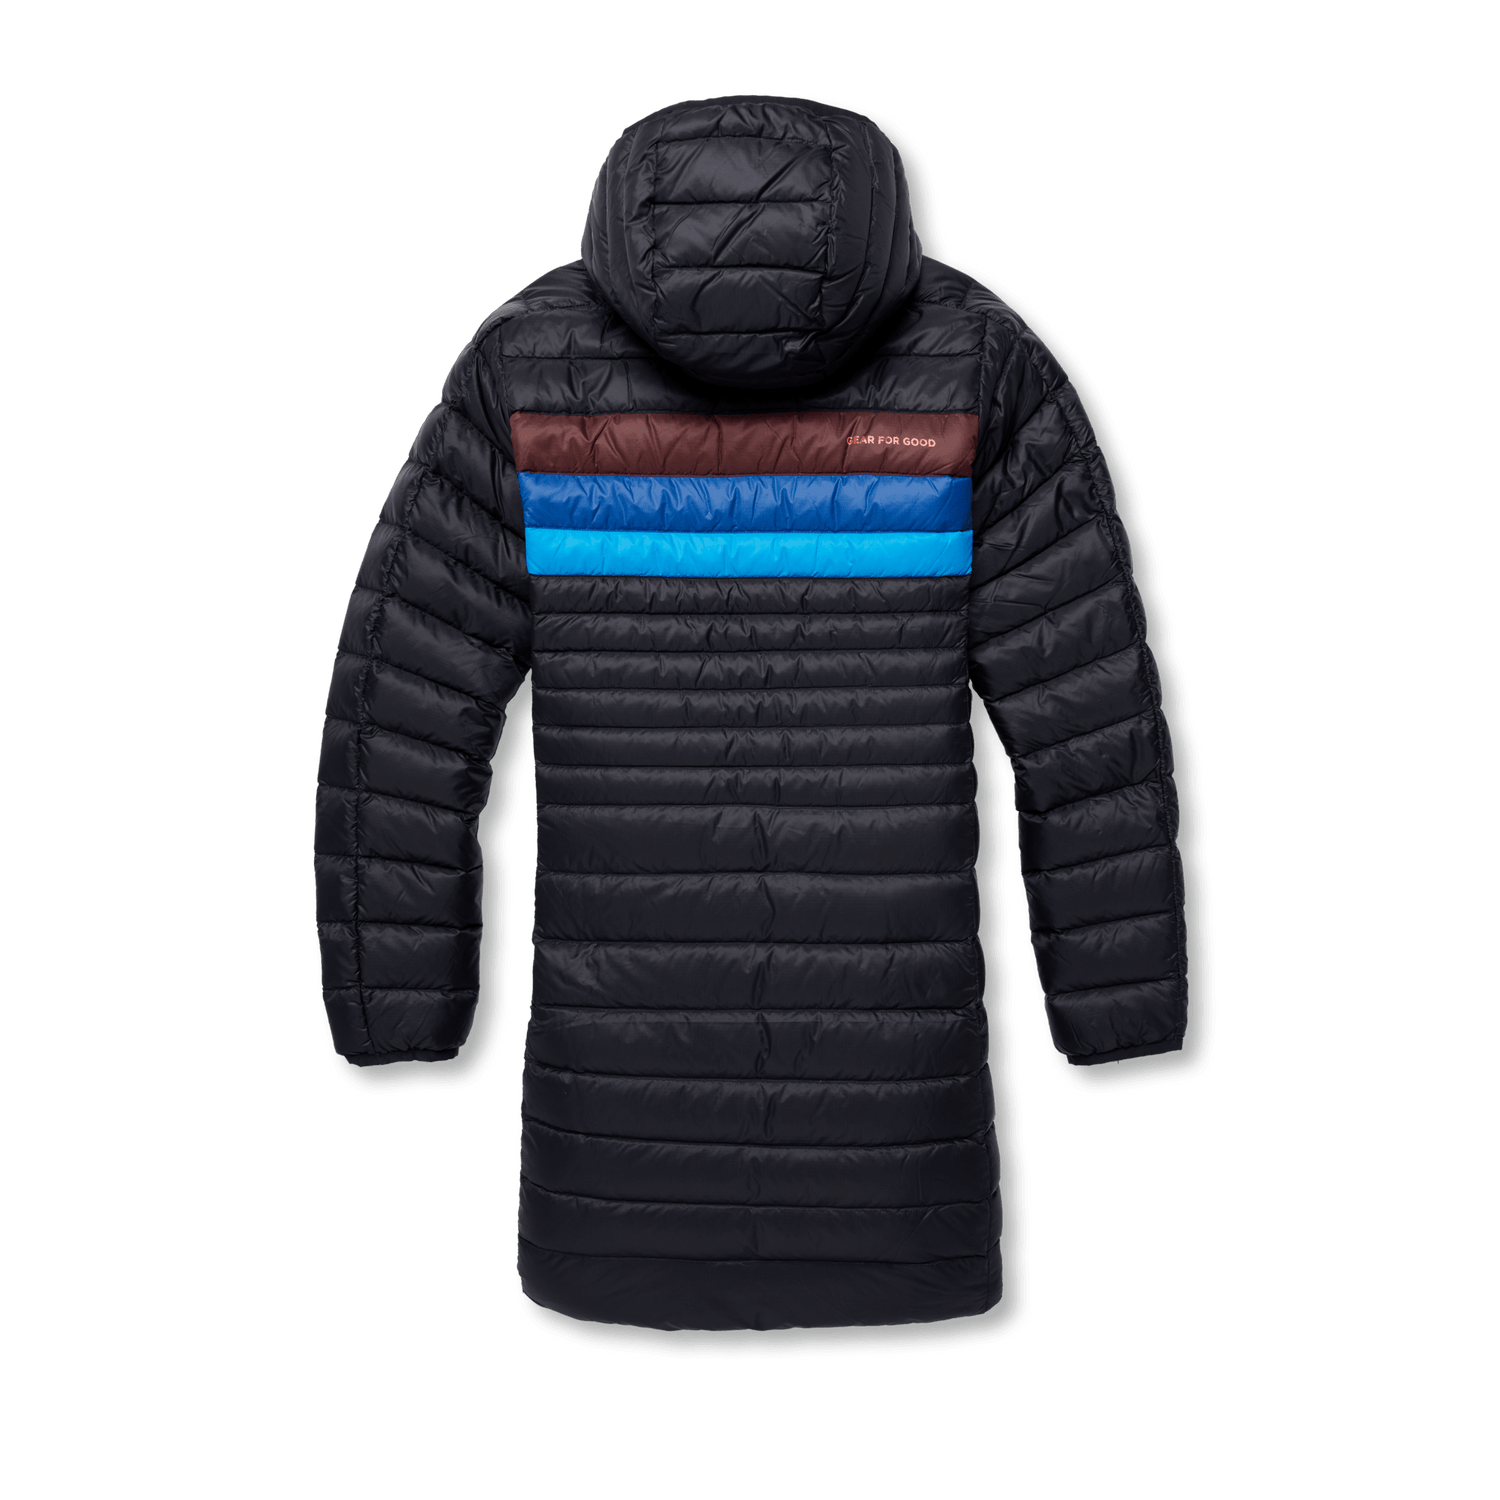 Cotopaxi W's Fuego Down Parka - Responsibly sourced down Black & Chestnut Stripes Jacket